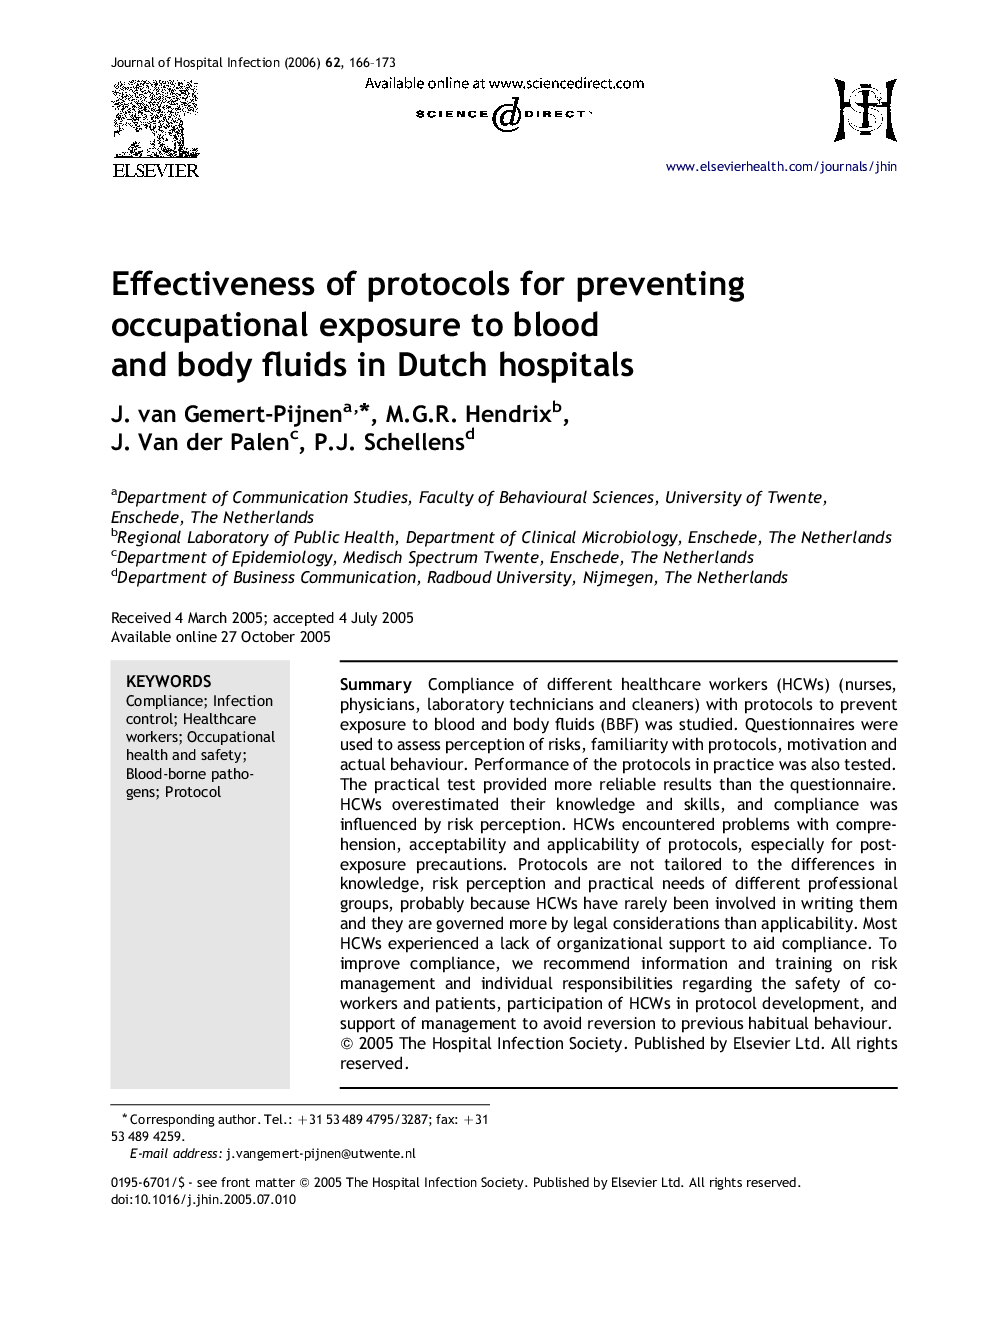 Effectiveness of protocols for preventing occupational exposure to blood and body fluids in Dutch hospitals